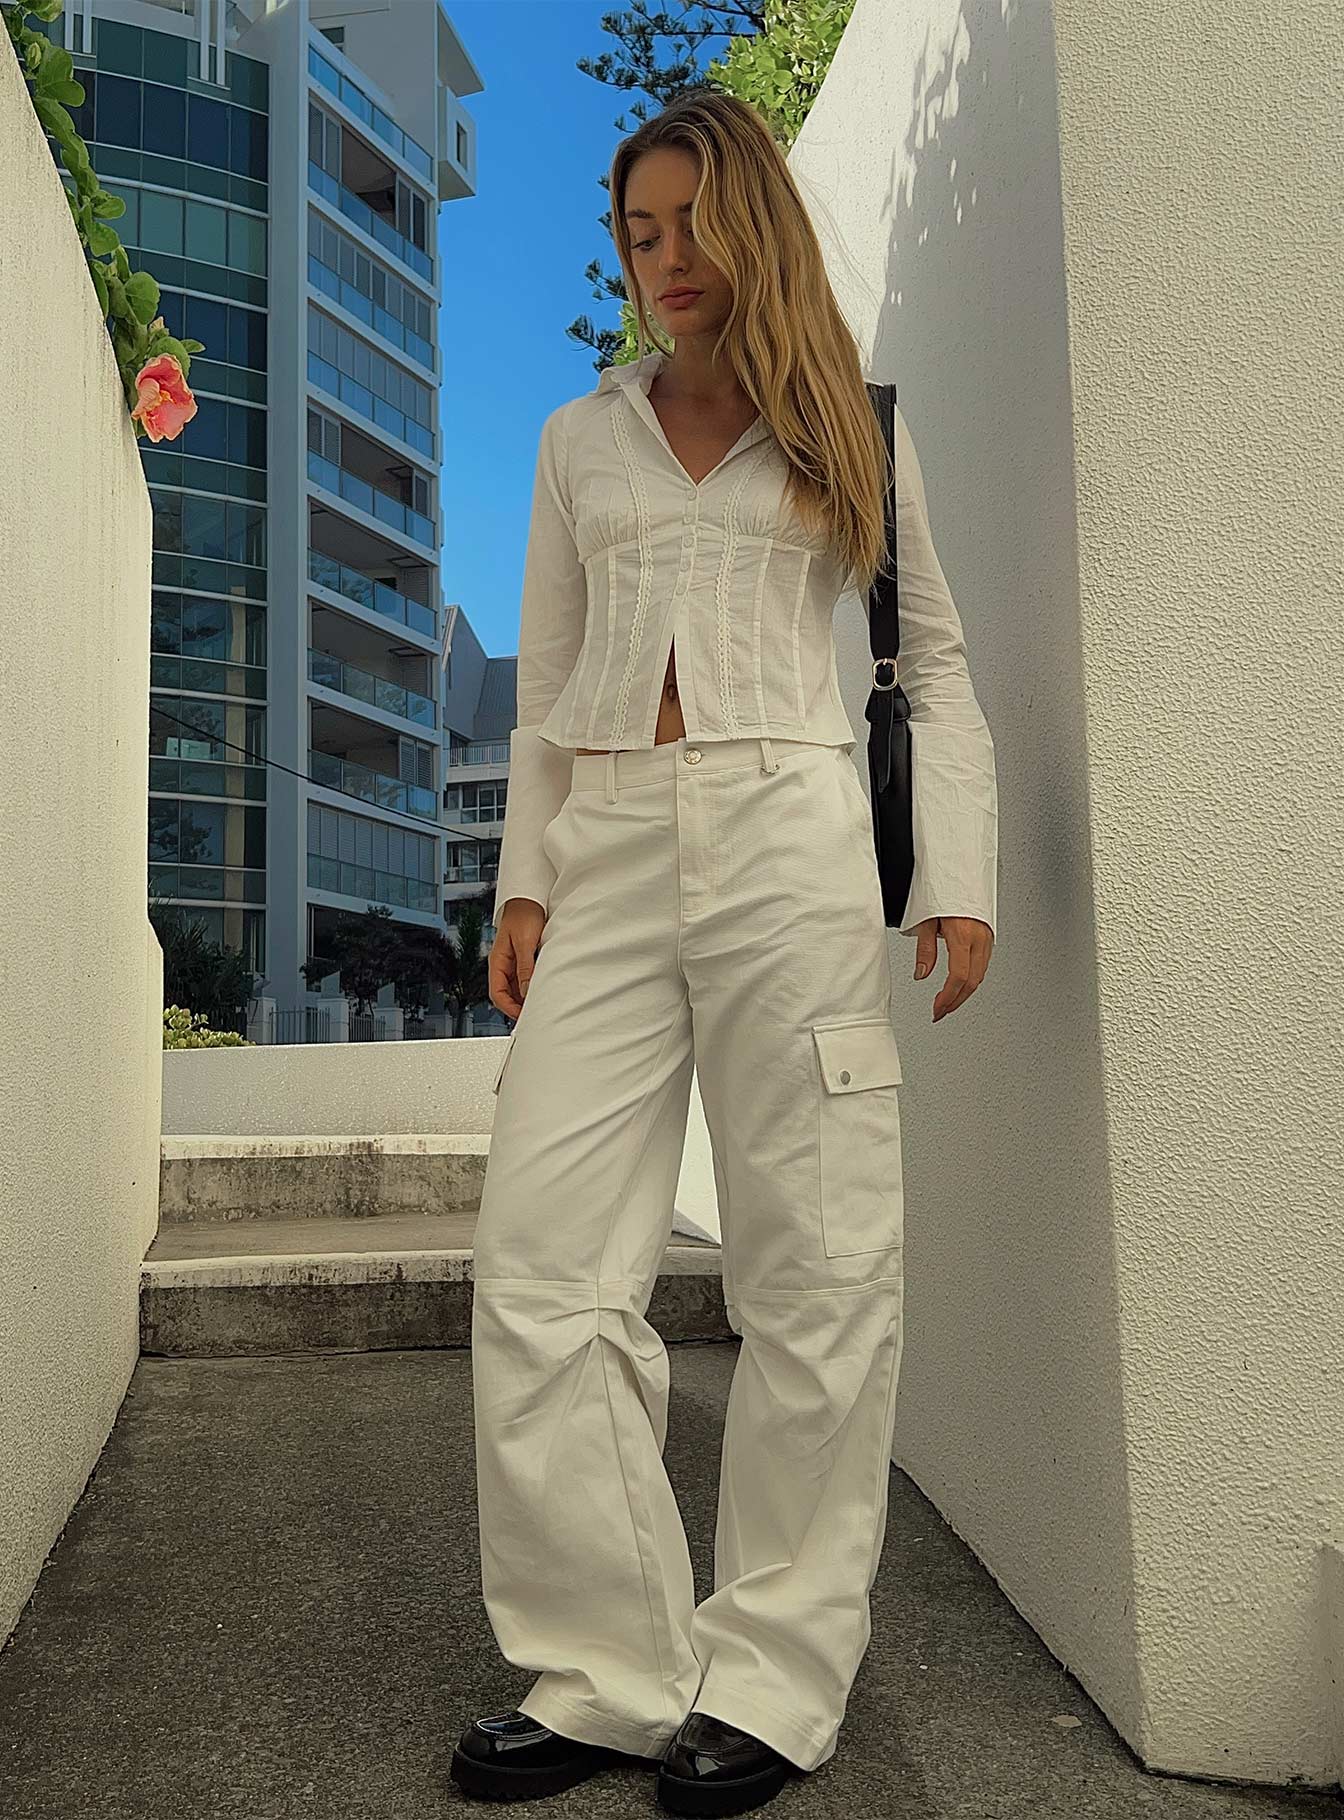 Reveey Pants  Low Rise Cargo Pants in White  Showpo USA